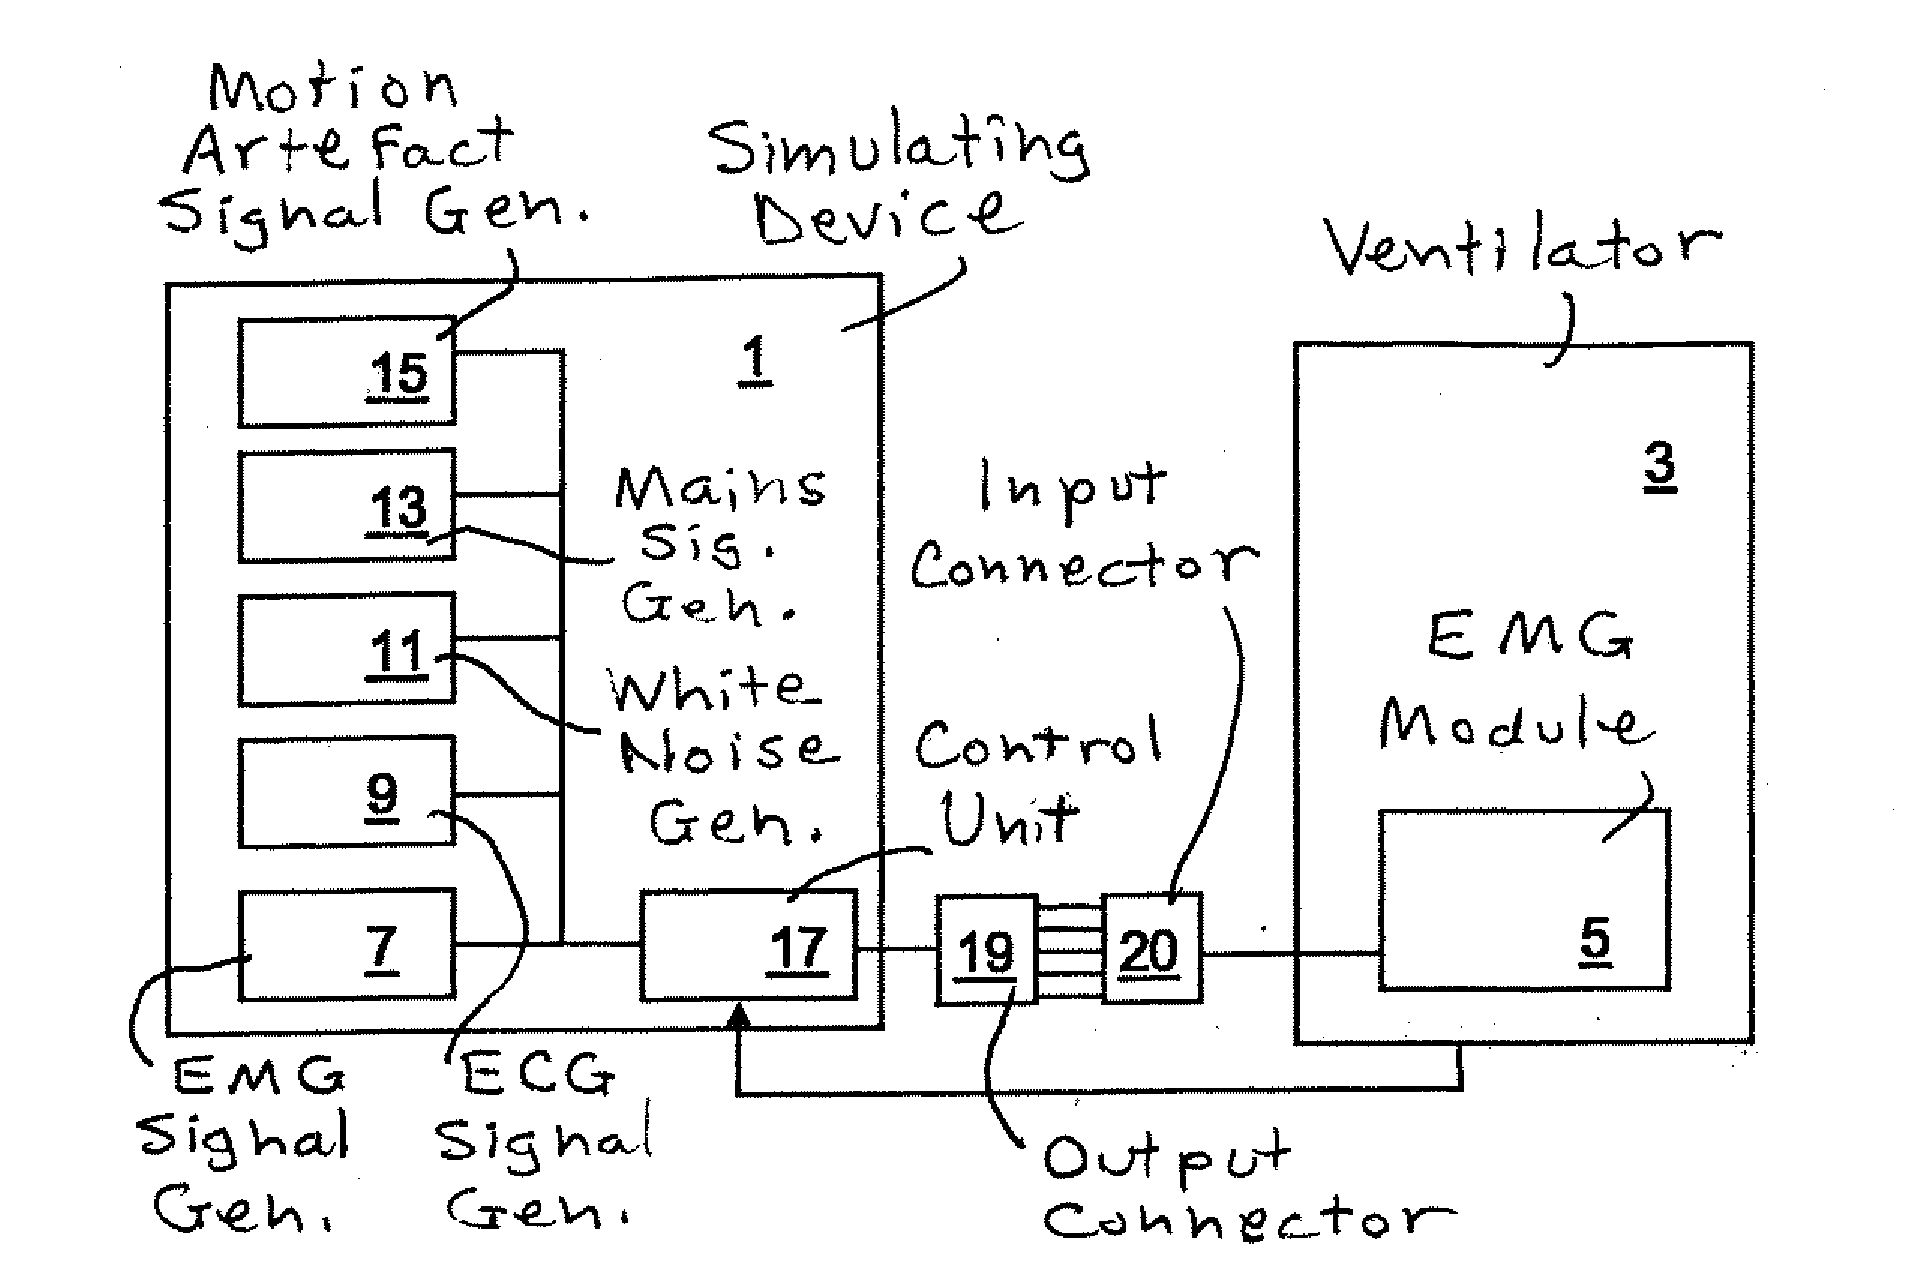 Simulator For Use With a Breathing-Assist Device